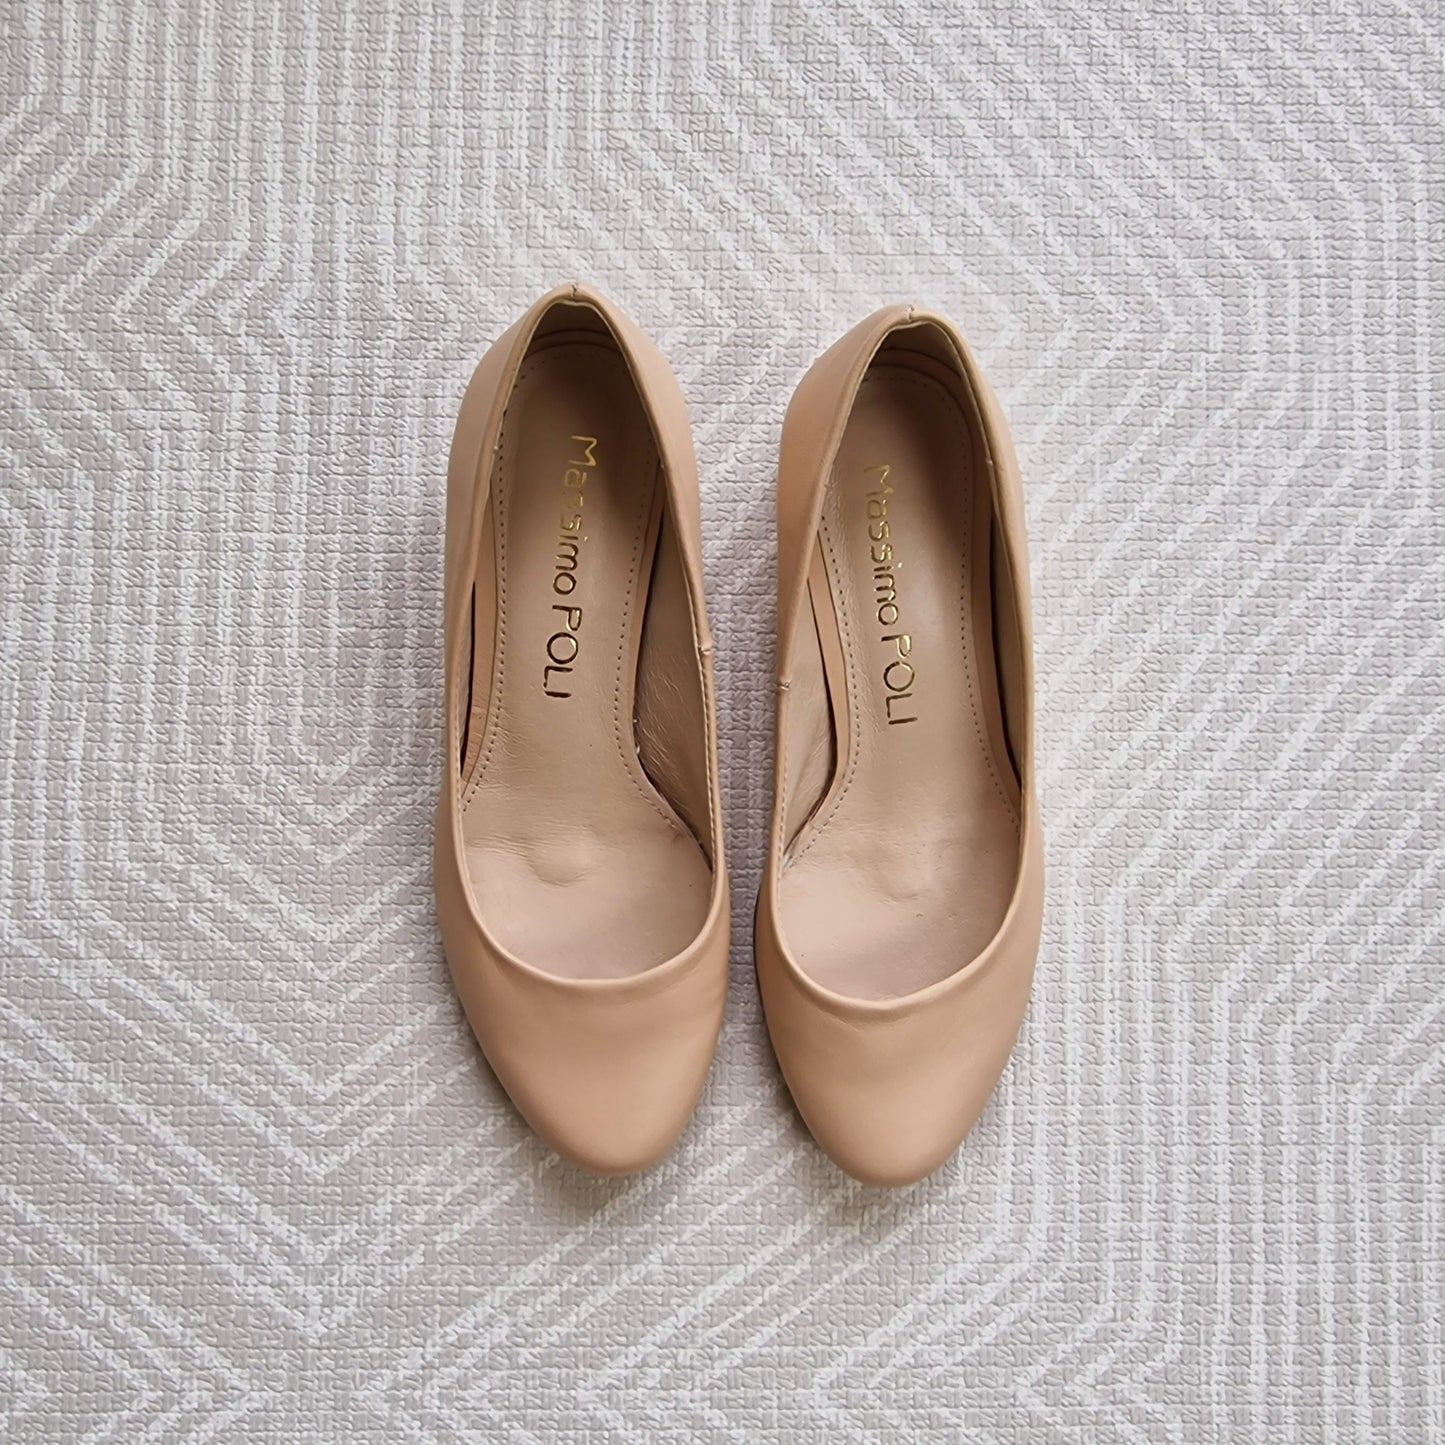 Nude leather petite court shoes